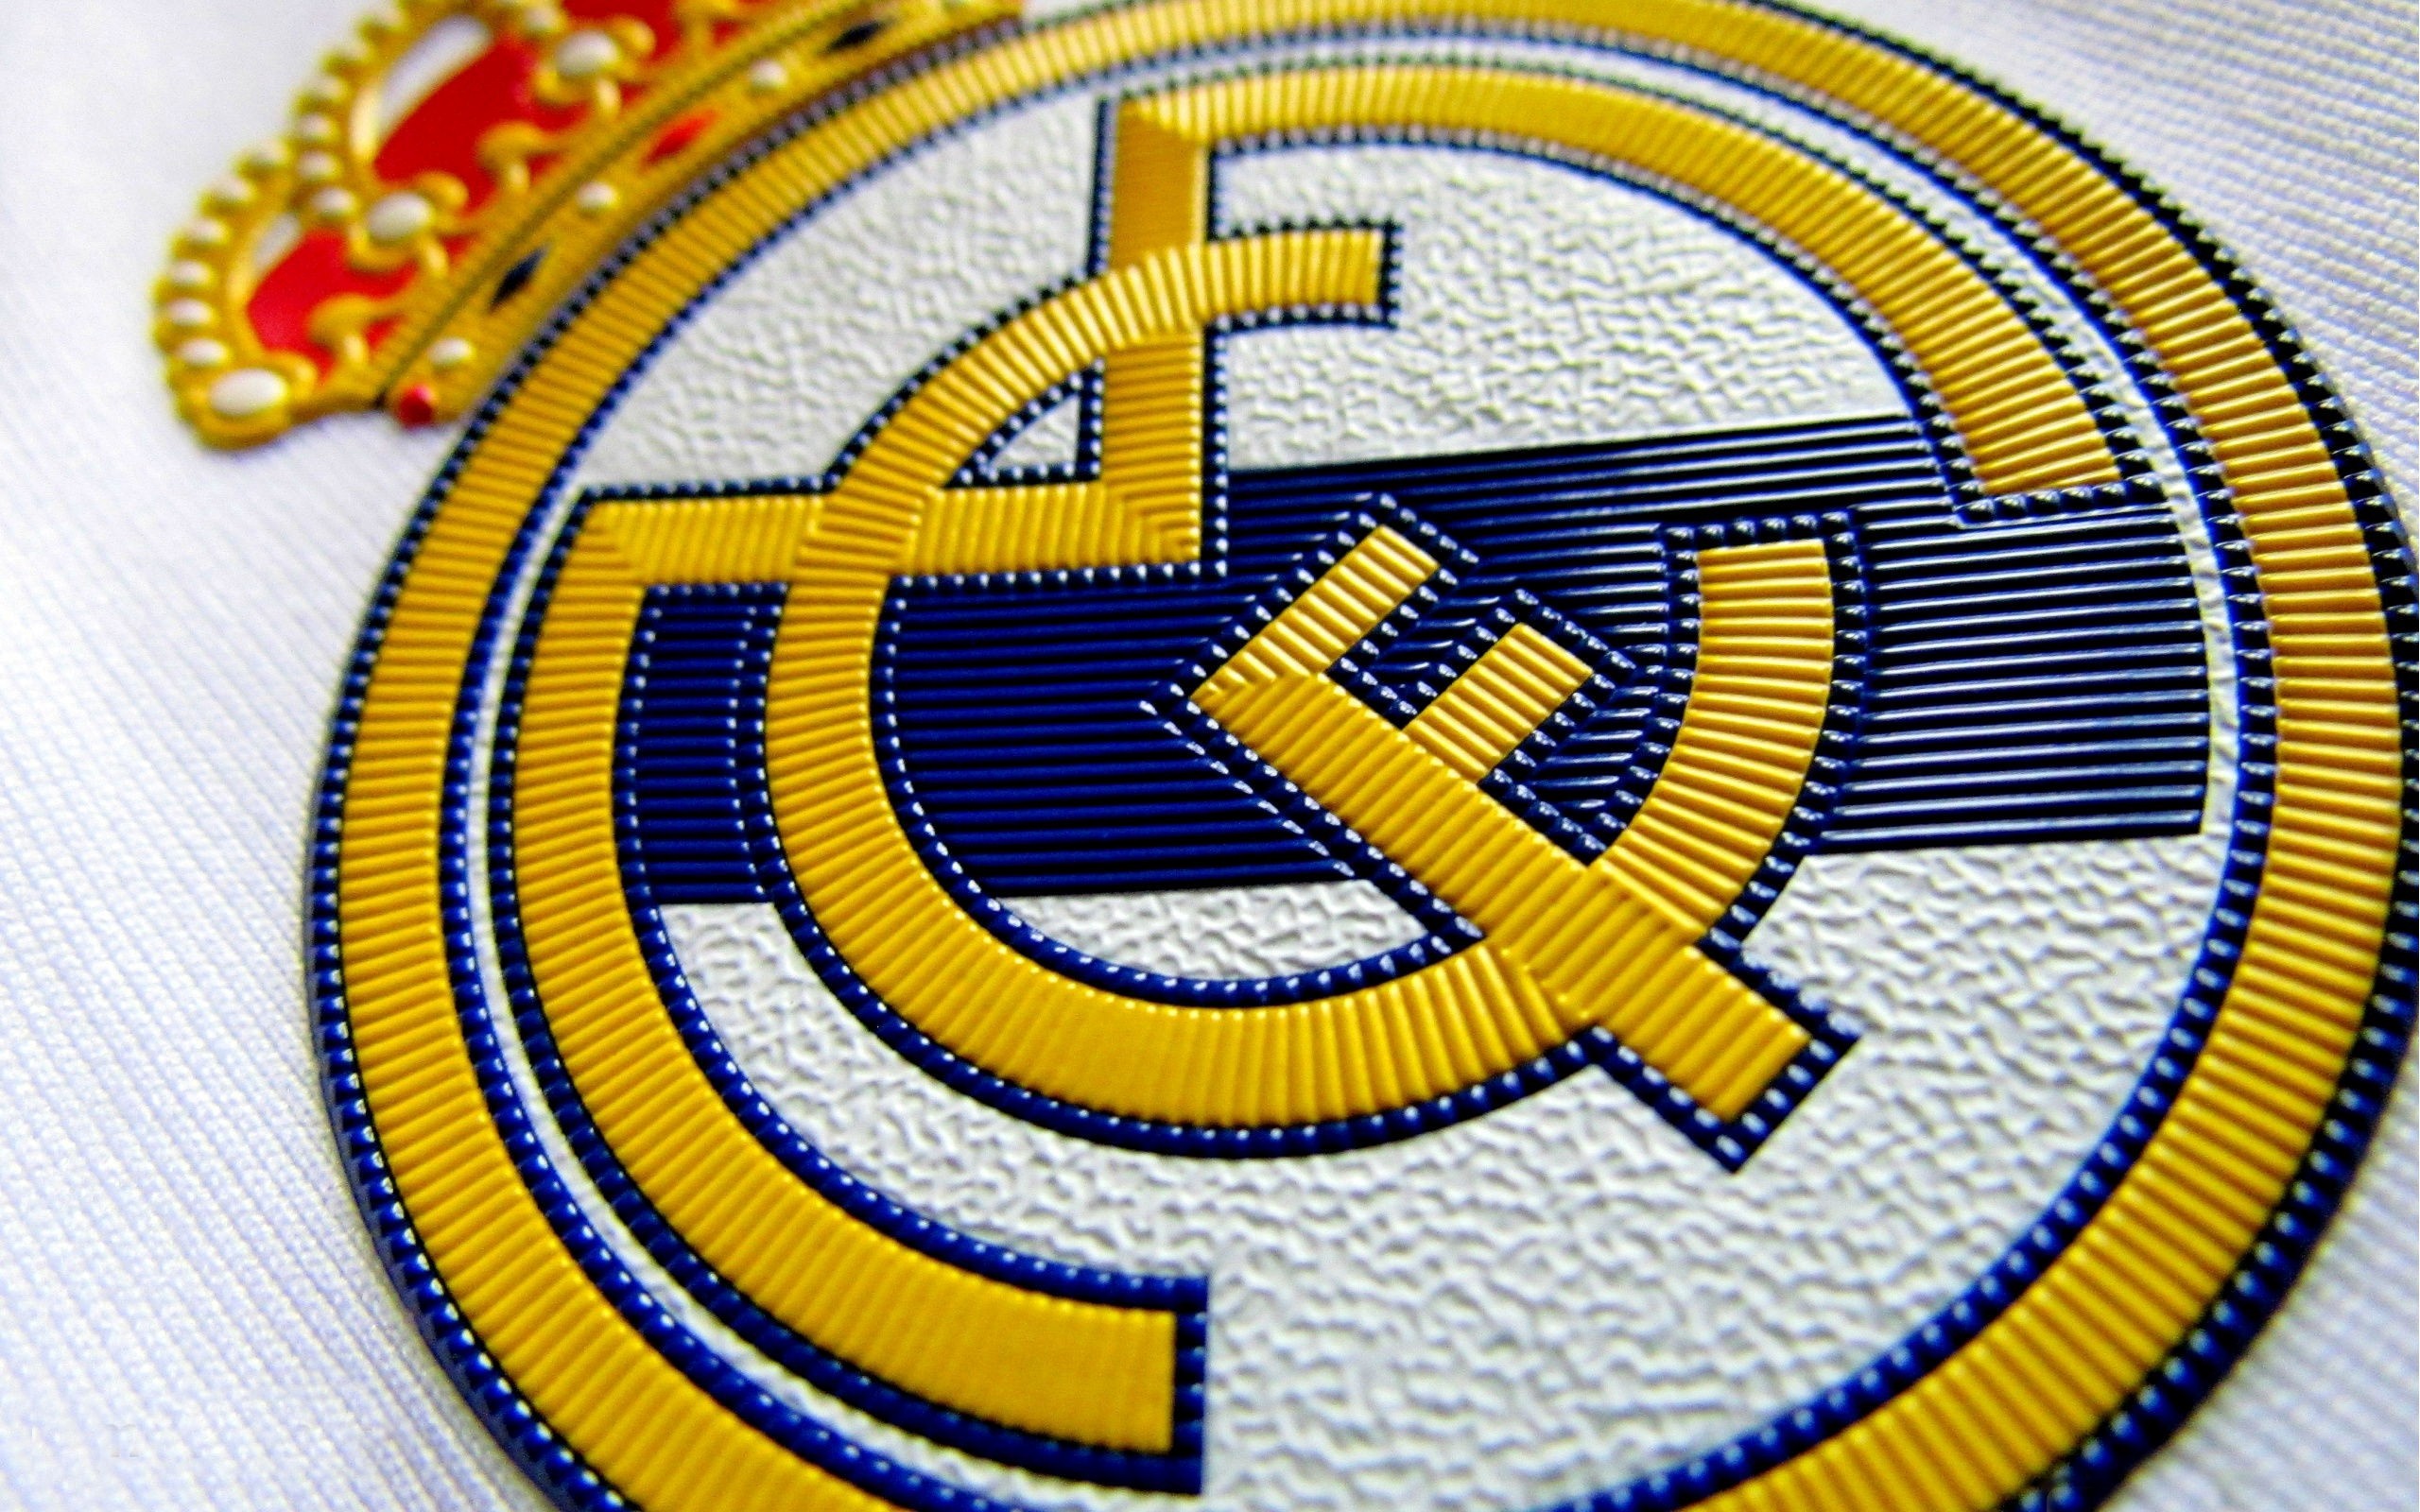 2560x1600 Real Madrid Football Club High Quality Logo Wallpaper | HD Famous Wallpapers